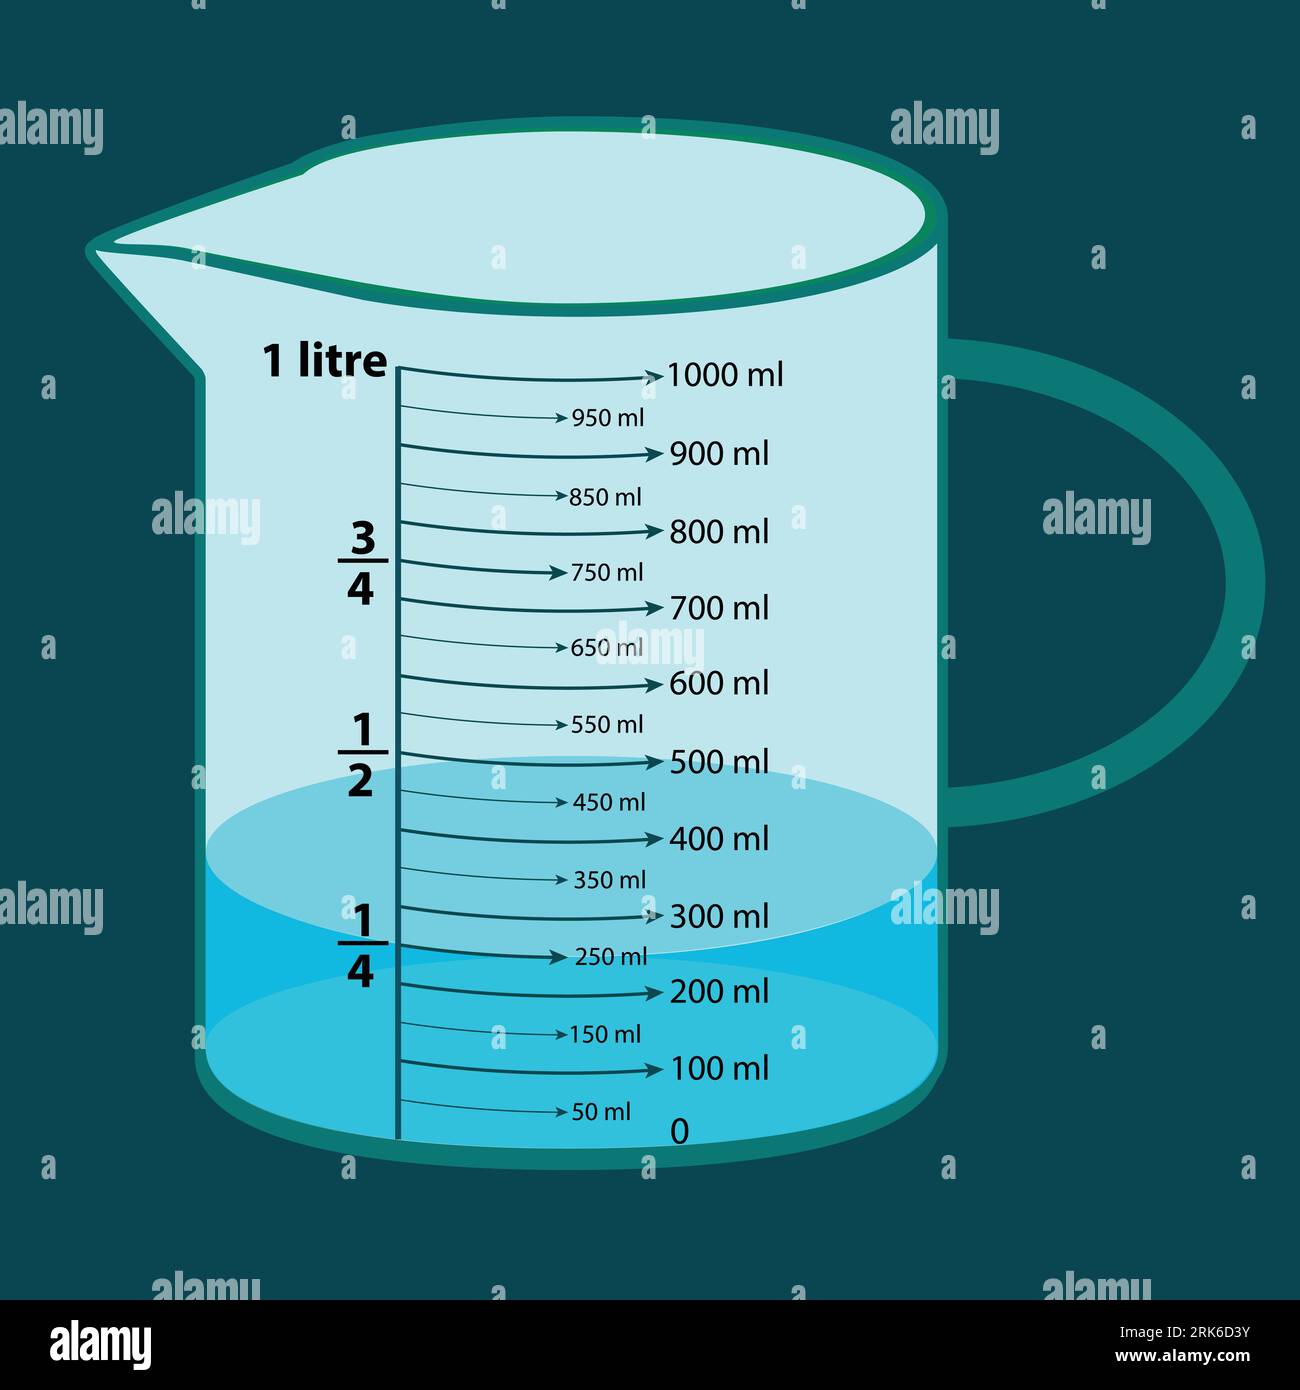 https://c8.alamy.com/comp/2RK6D3Y/the-scale-measuring-jug-250ml-liquid-with-measuring-scale-beaker-for-chemical-experiments-in-the-laboratory-vector-illustration-2RK6D3Y.jpg